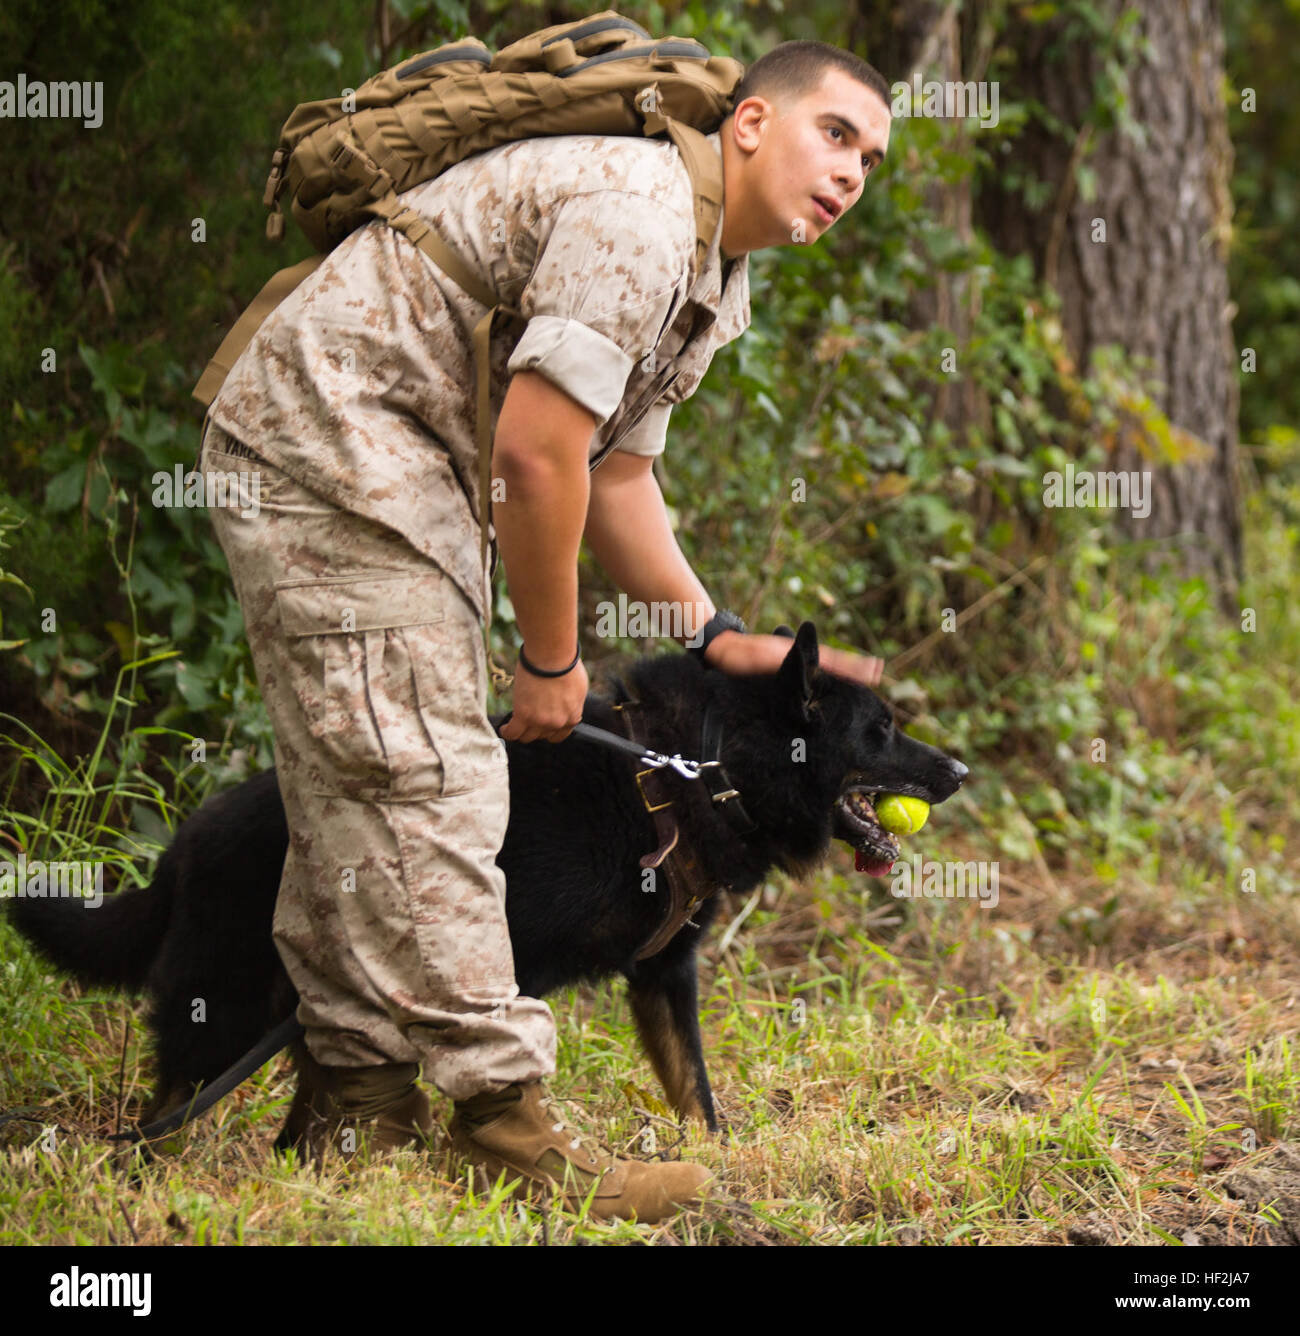 Lance Cpl. Jacob Varela, a combat tracker with Military Working Dog Platoon, 2nd Law Enforcement Battalion, II Marine Expeditionary Force Headquarters Group, and a Chicago, Il., native, pets his dog Atilla after she found a hidden tennis ball aboard Marine Corps Base Camp Lejeune, N.C., Oct. 9, 2014. Atilla was able to capture the ball by tracking the scent from another Marine. (U.S. Marine Corps photo by Lance Cpl. Lucas J. Hopkins/Released) Unleashed, Military Working Dogs, handlers build relationship 141009-M-TR086-196 Stock Photo